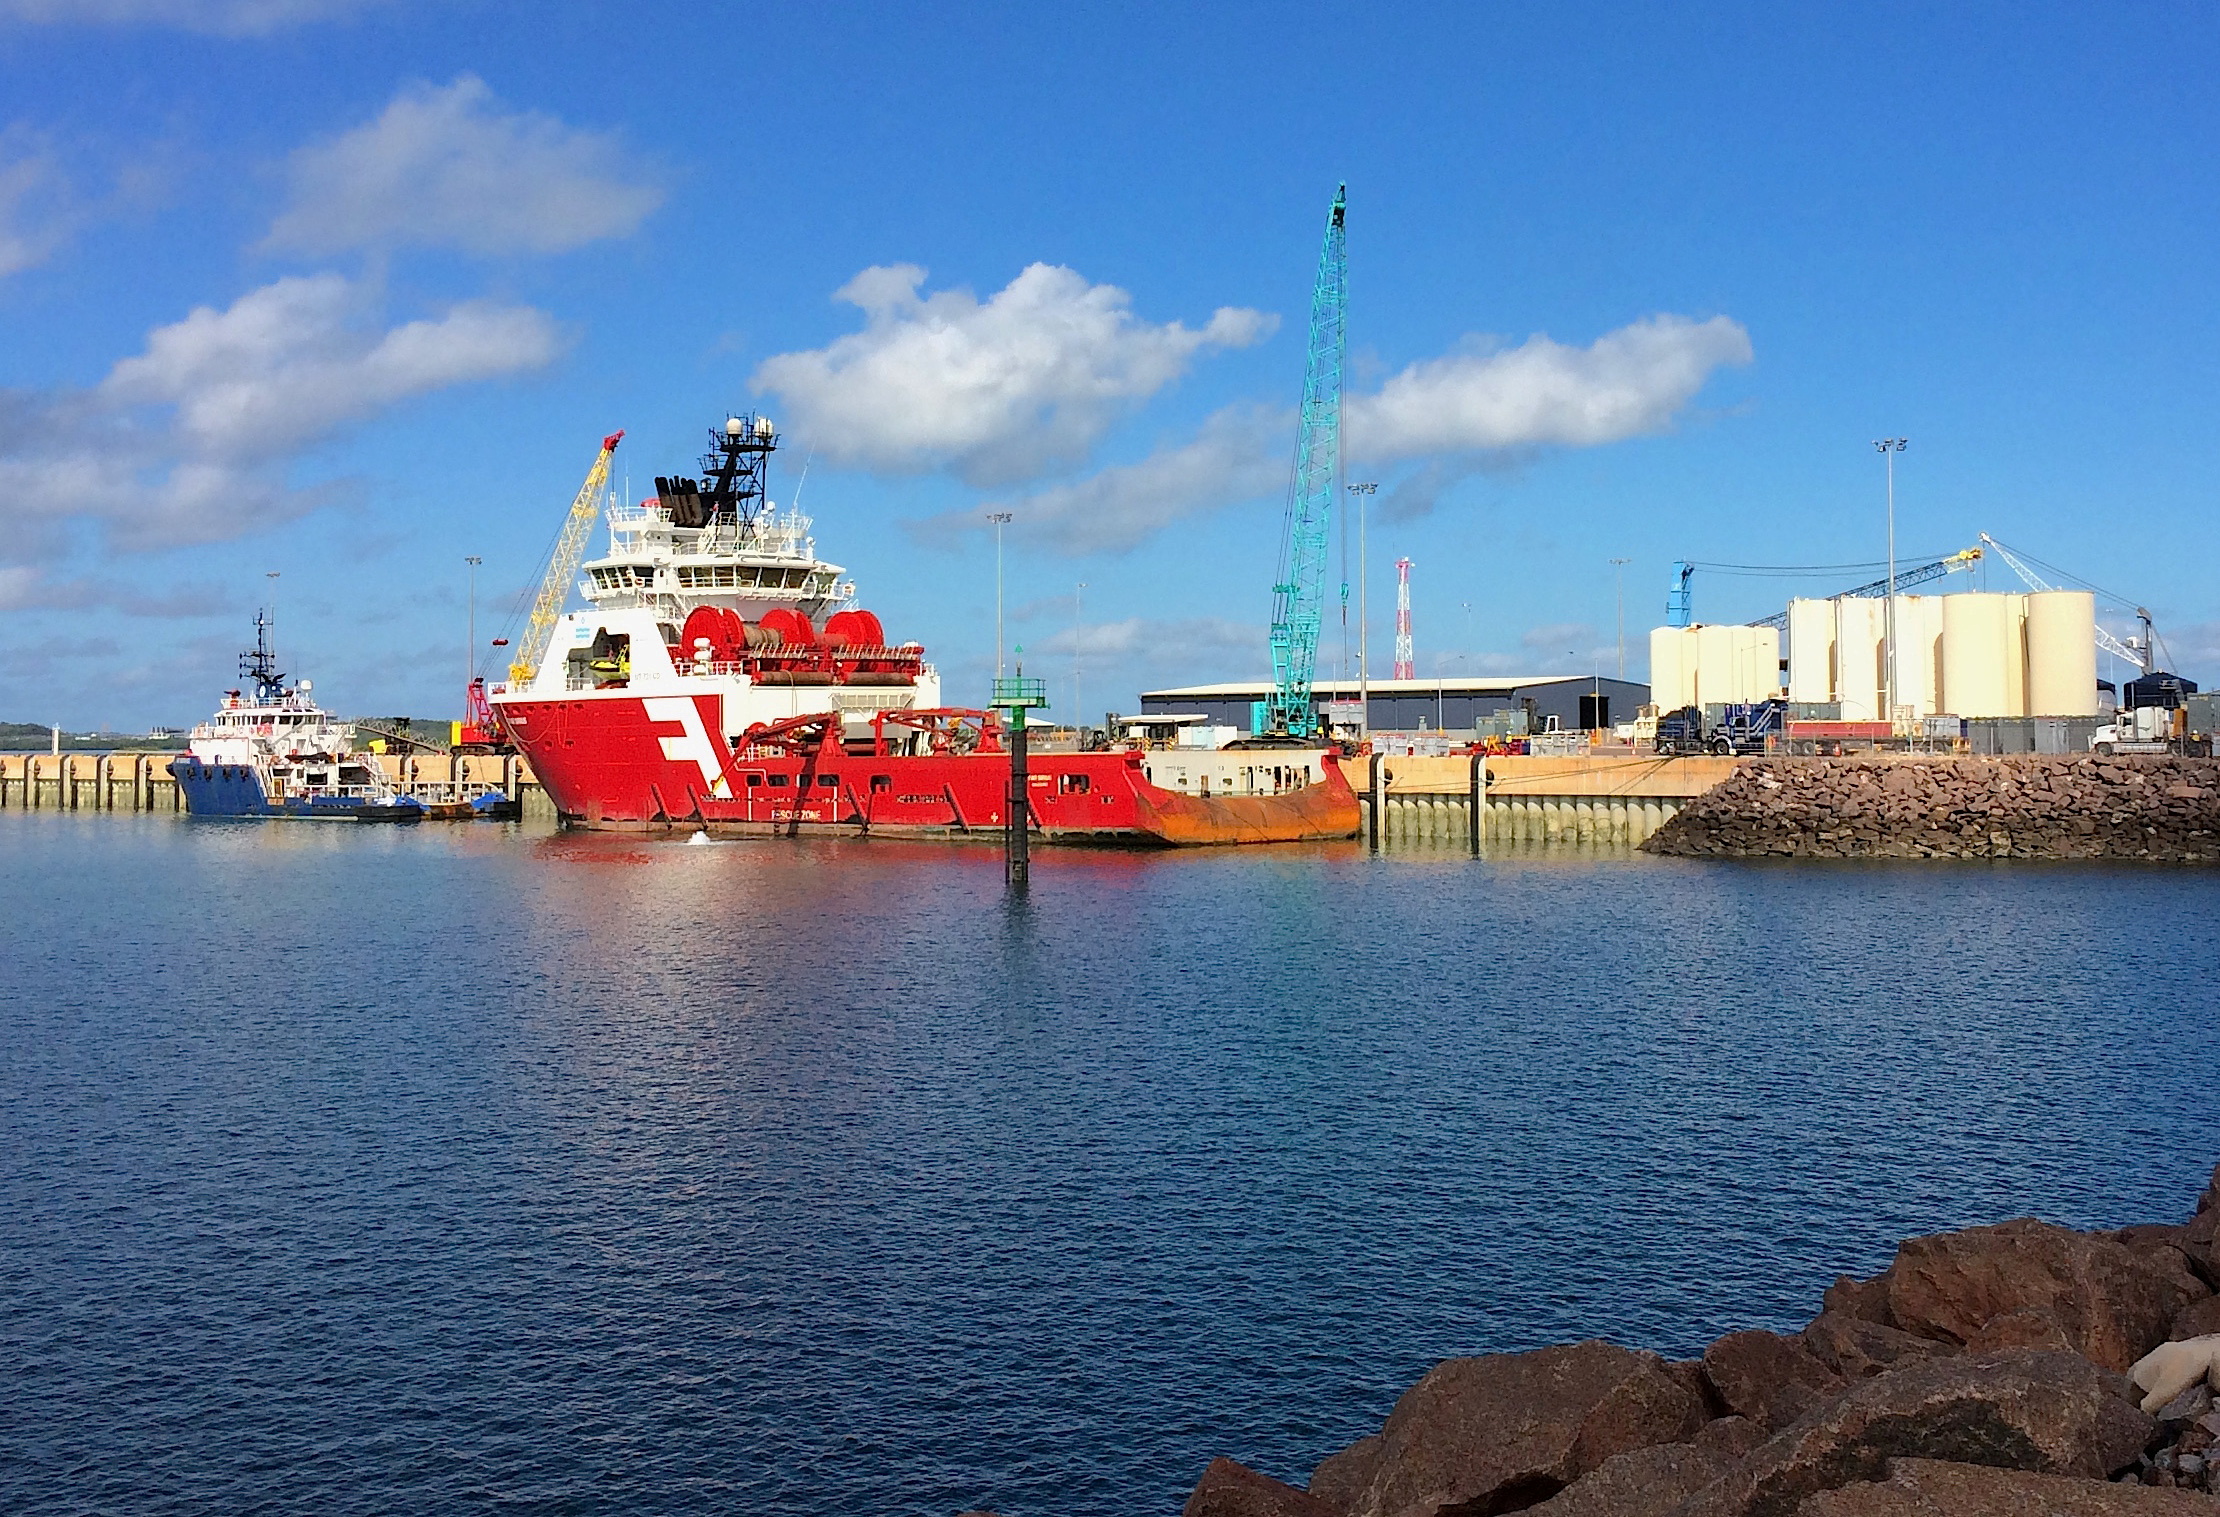 Supply vessels for the offshore gas rigs sit at Darwin port in northern Australia